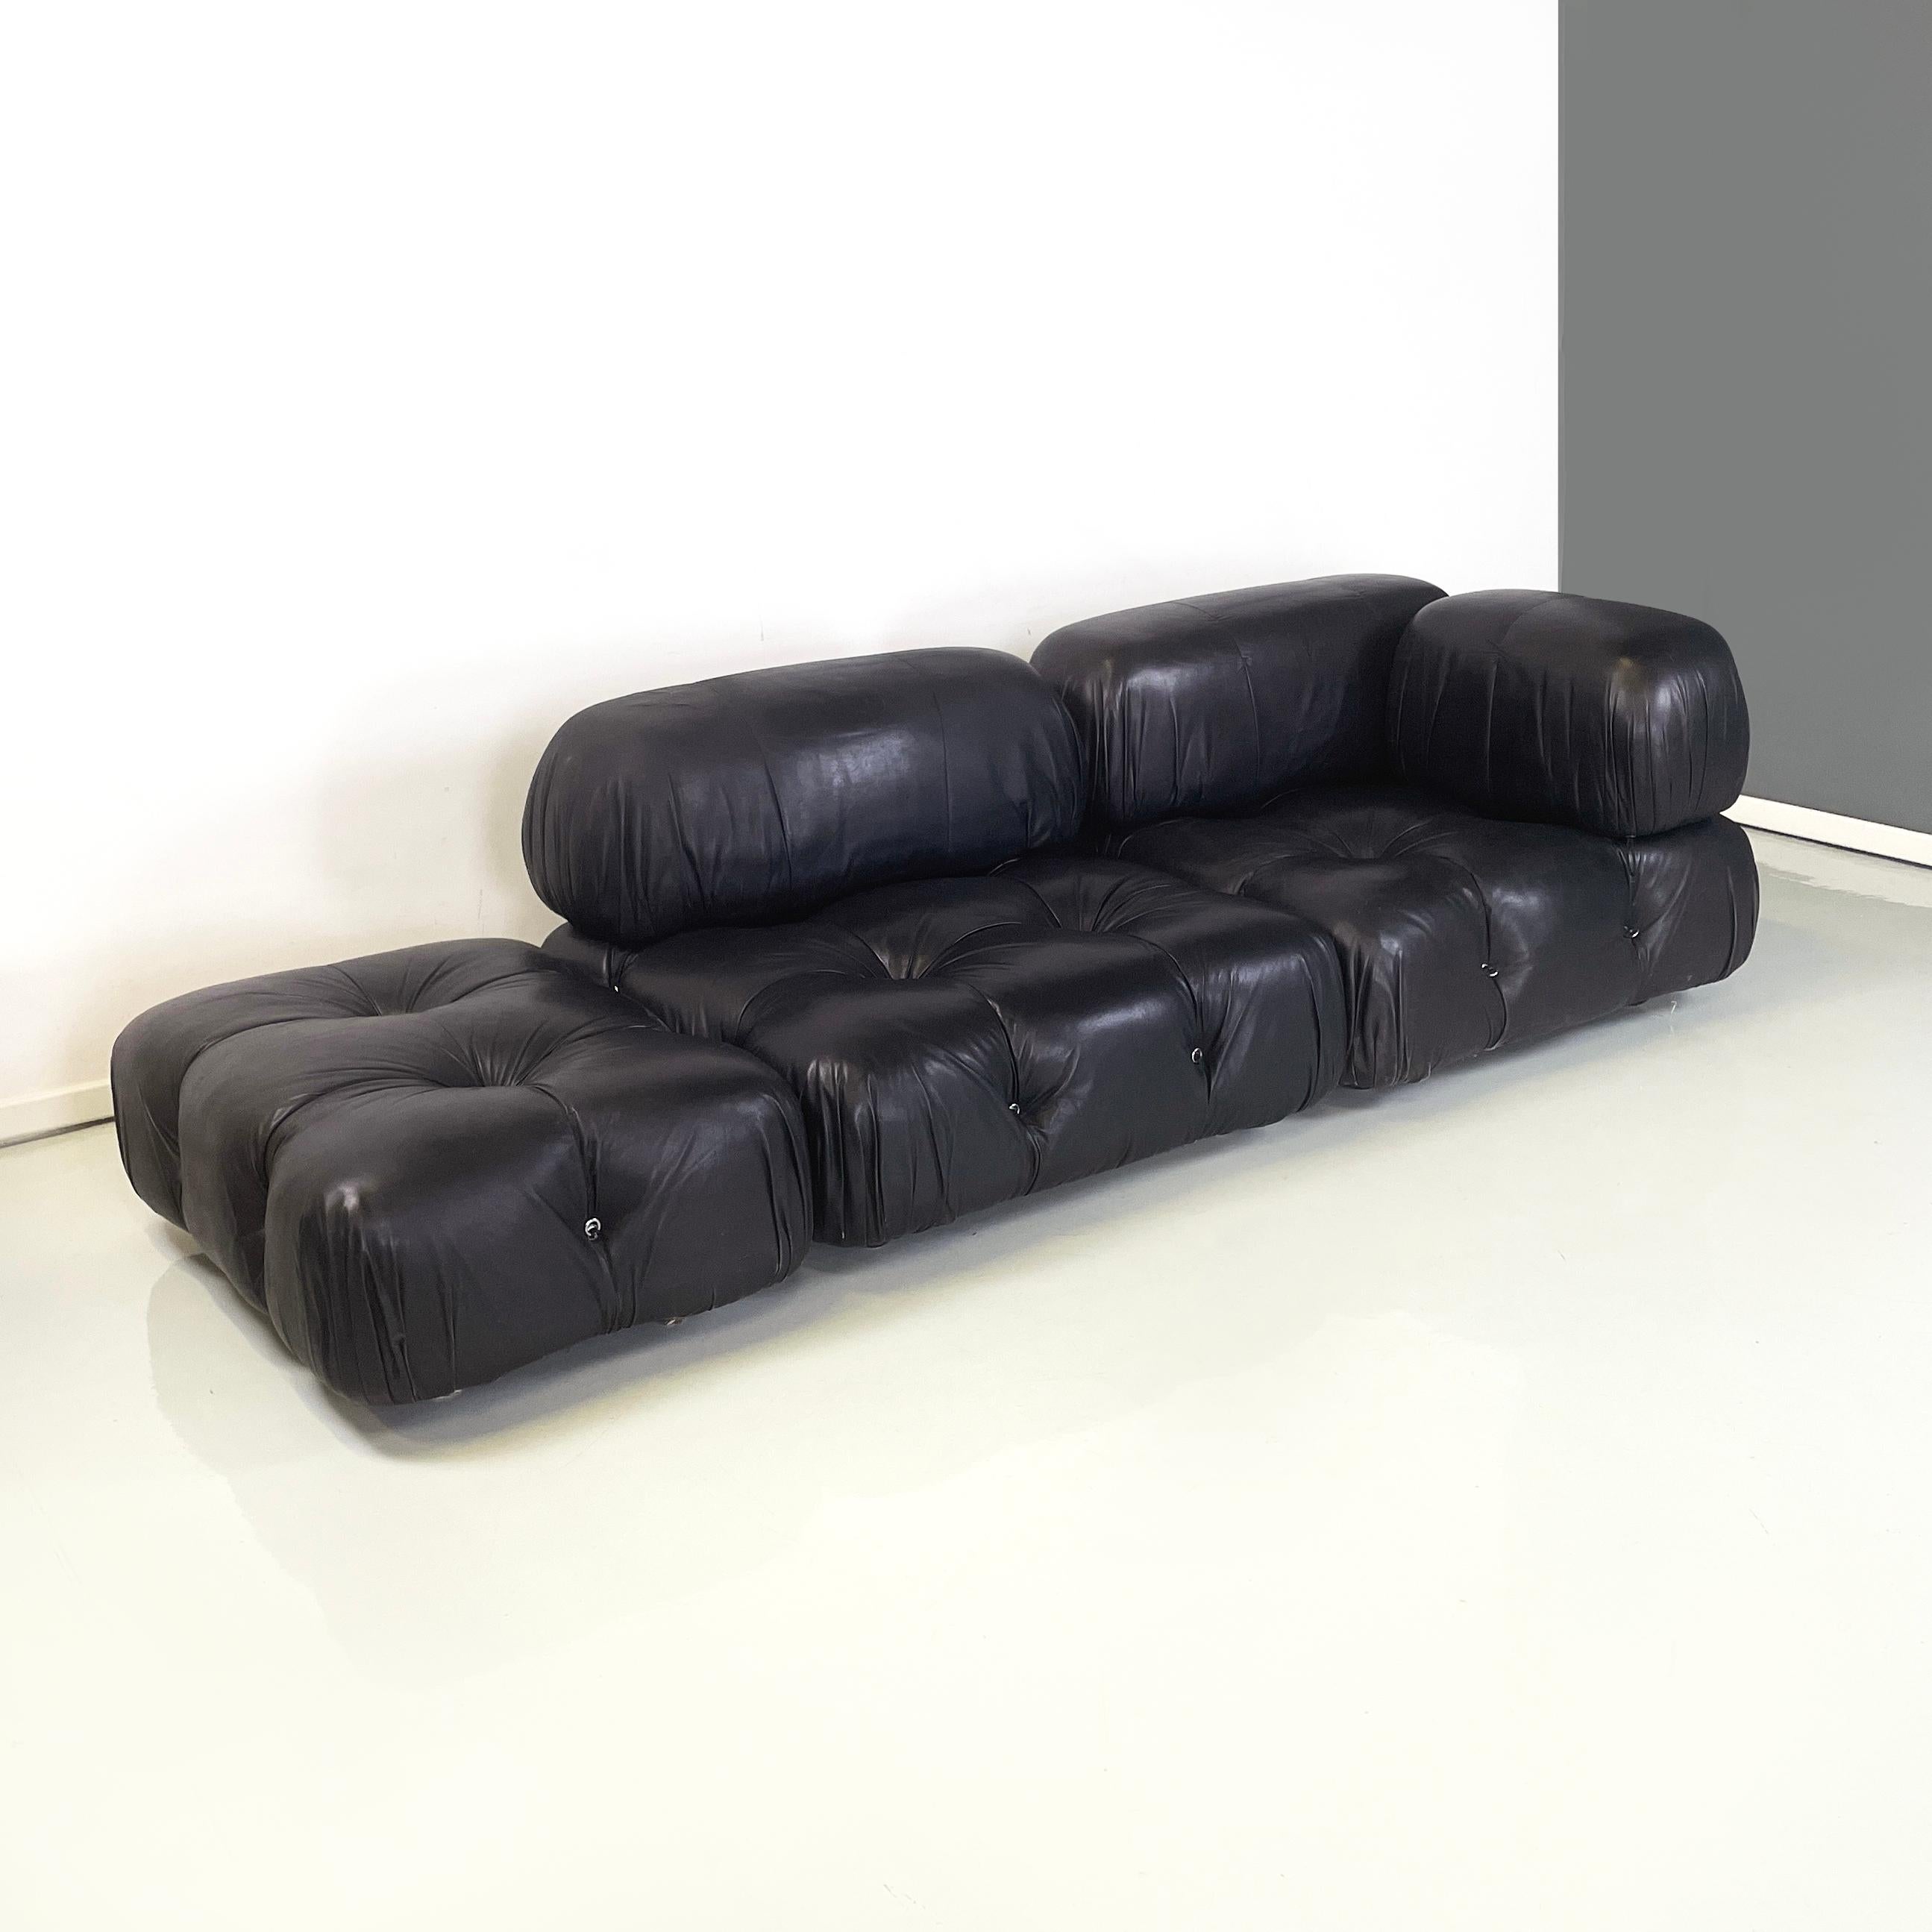 Italian modern Black leather modular sofa Camaleonda by Mario Bellini for B&B, 1970s
Modular sofa mod. Camaleonda entirely padded and covered in black leather. The rounded backrests are fixed to the seat thanks to metal hooks. The couch has two